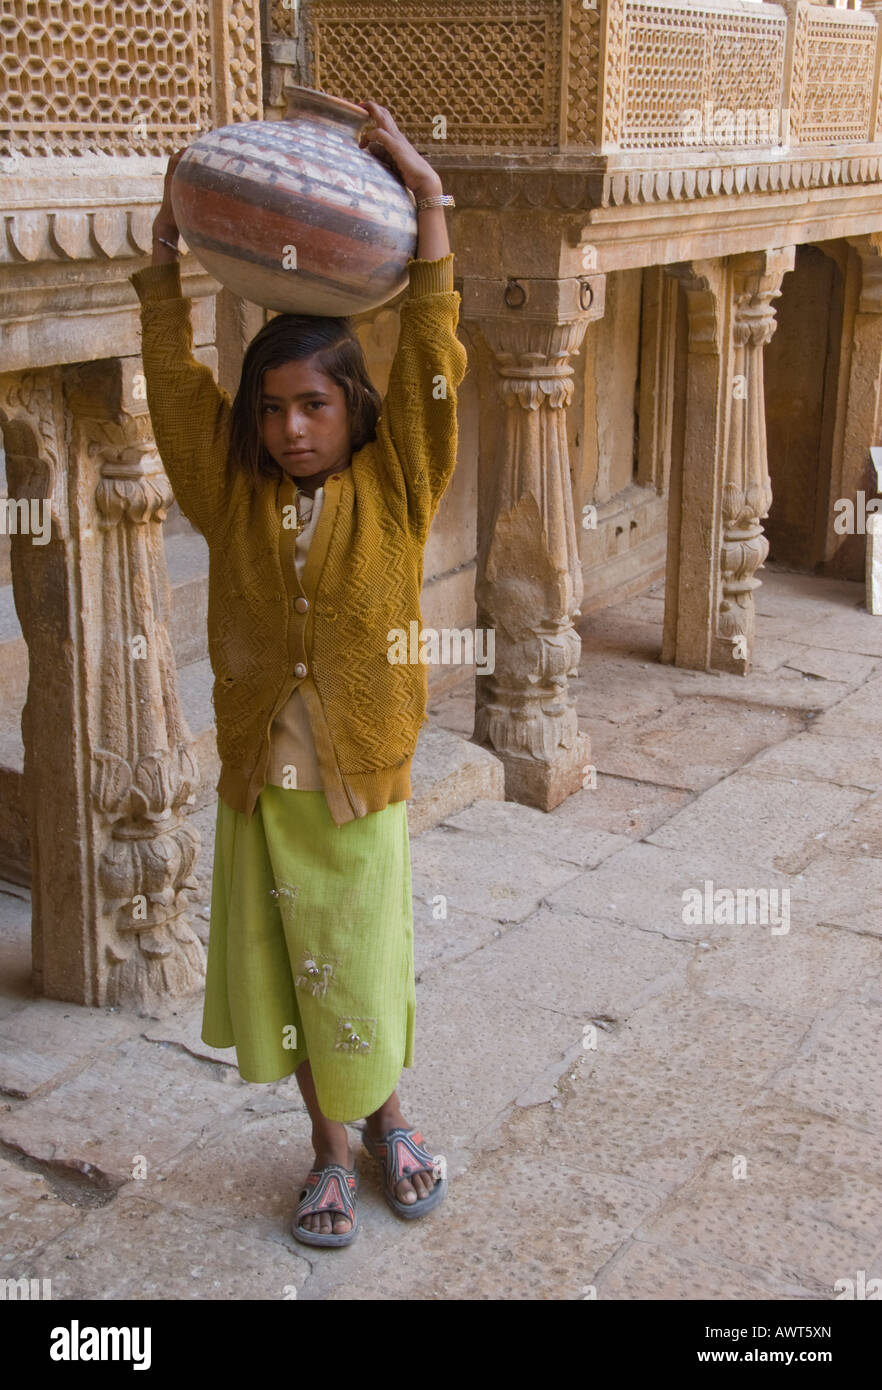 Portrait of a young girl carrying a water jug in Jaisalmer, Rajasthan, India. Stock Photo